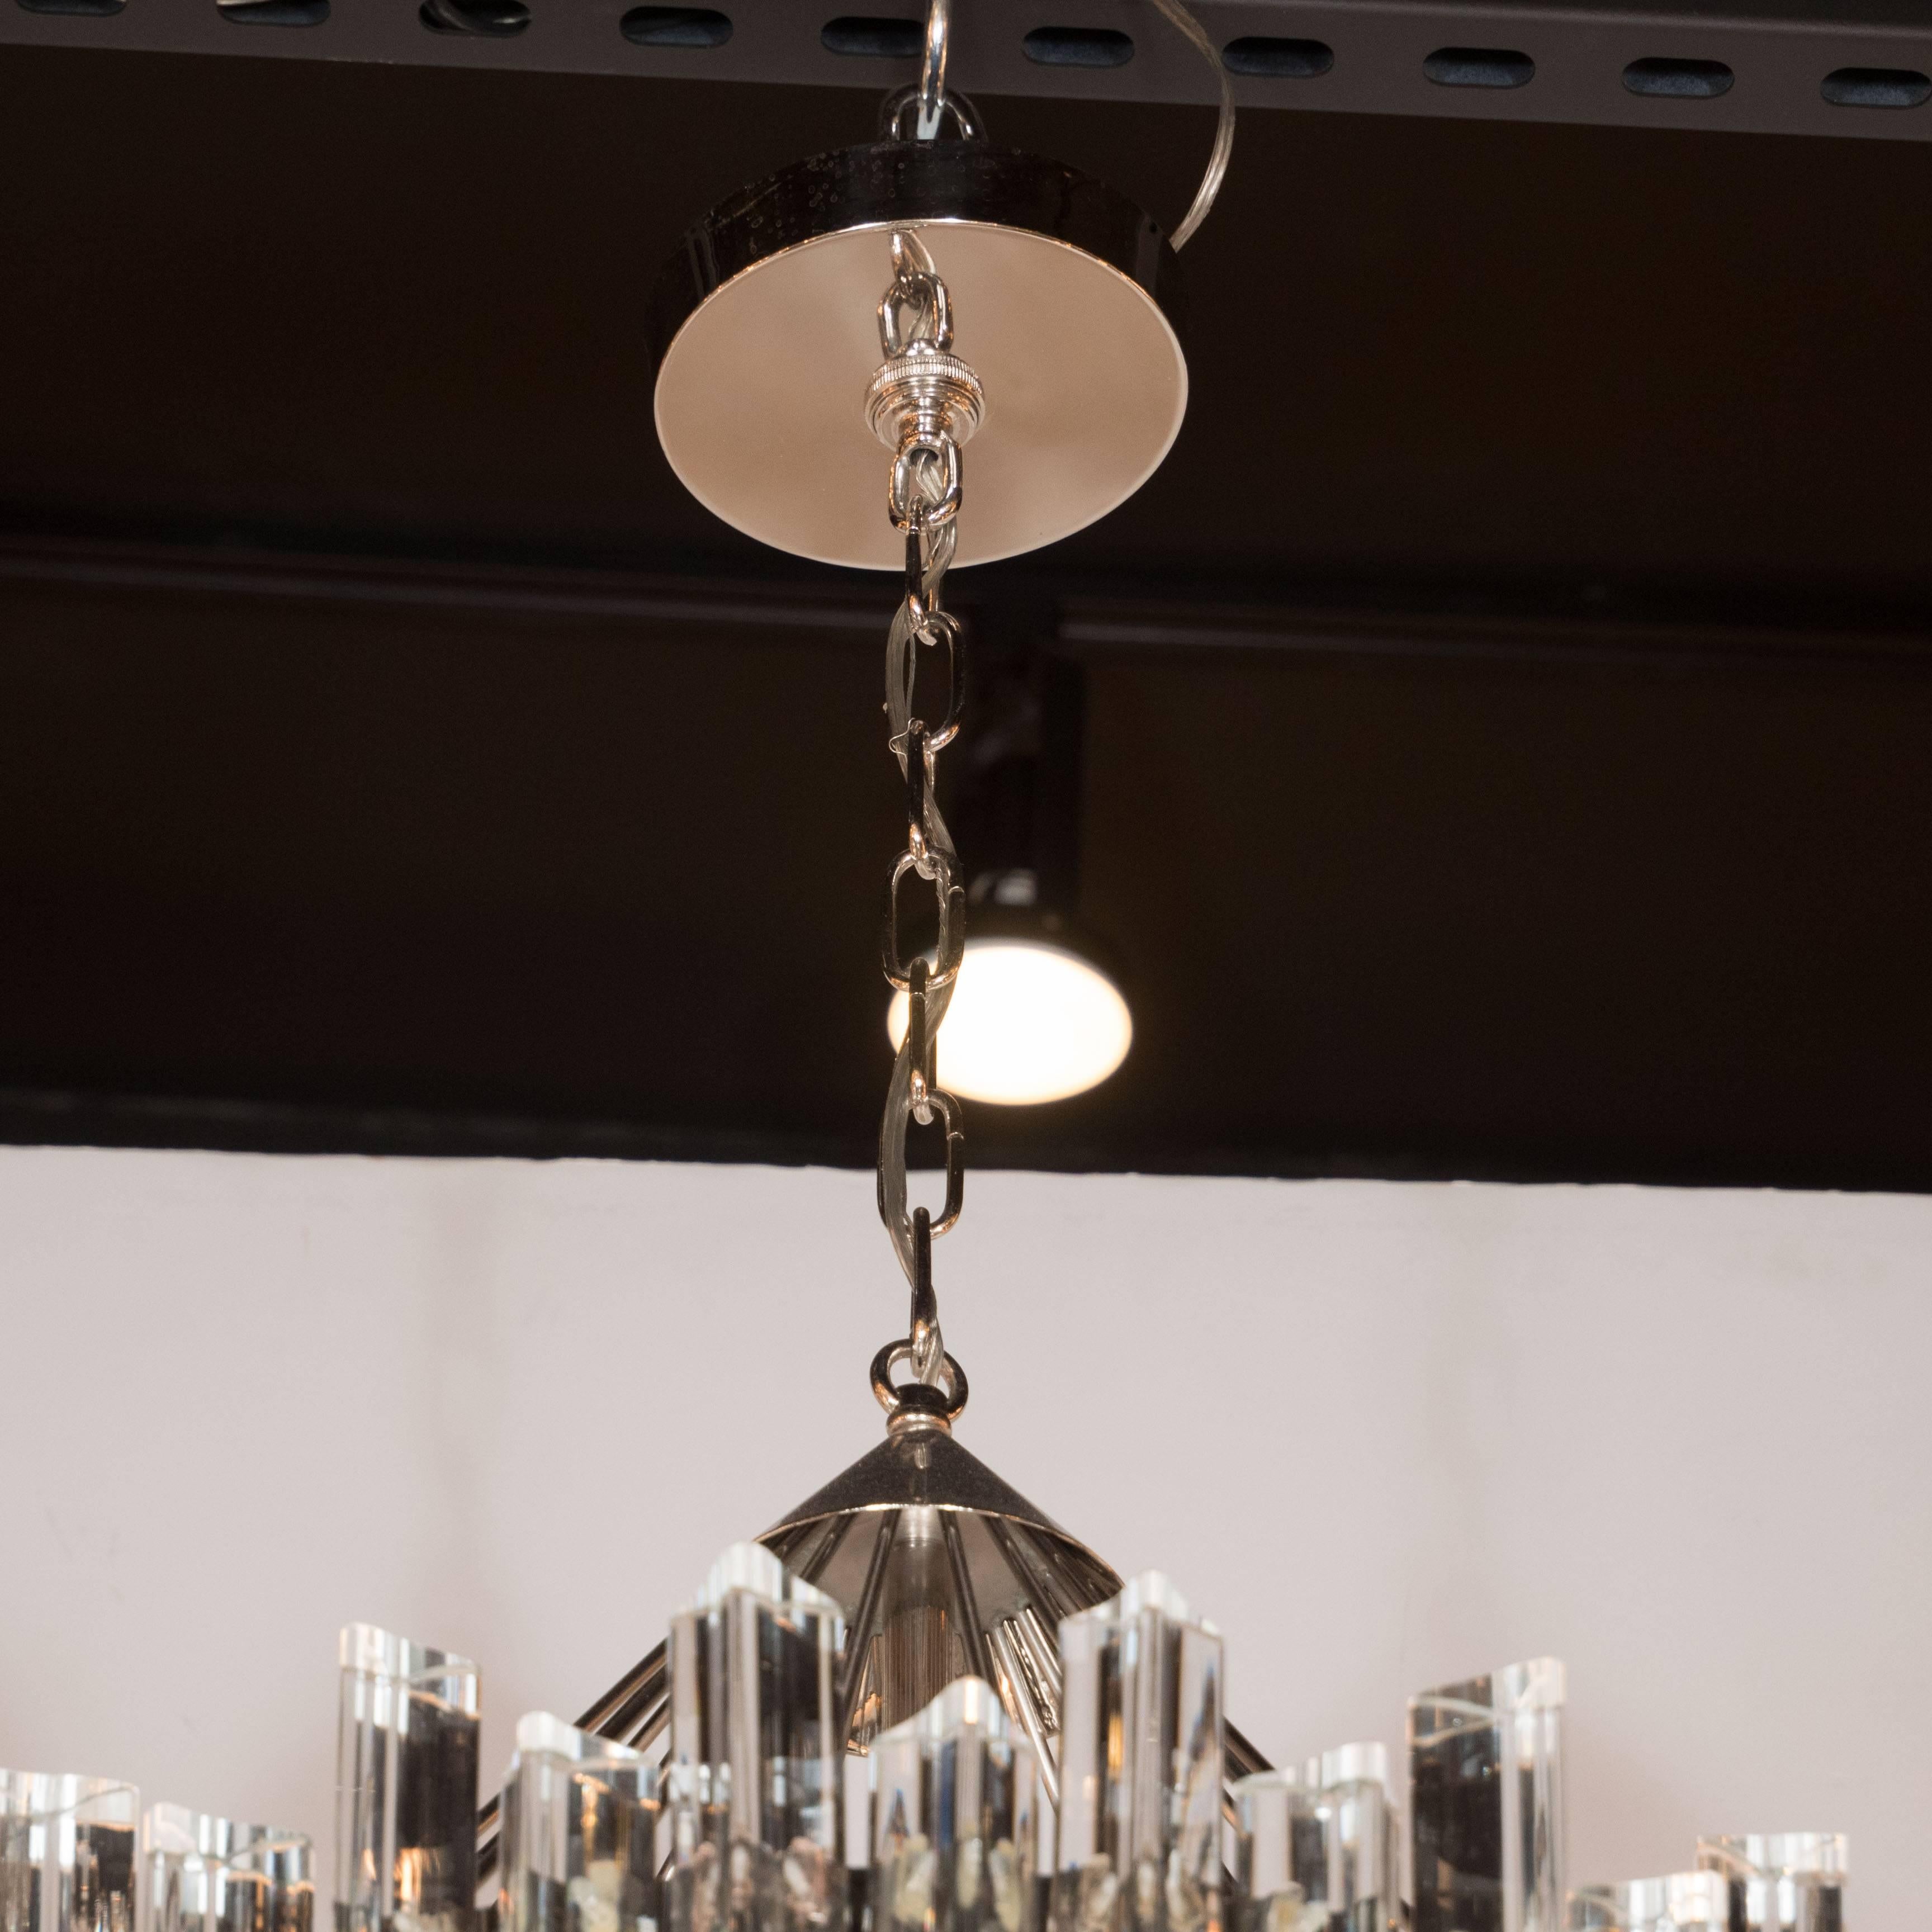 A Mid-Century modernist single-tier stepped triedre chandelier by Camer. A chrome birdcage-frame fitted with a single Edison-based socket surrounded by individually hung crystal triedre prisms in a staggered manner. The overall hanging height can be